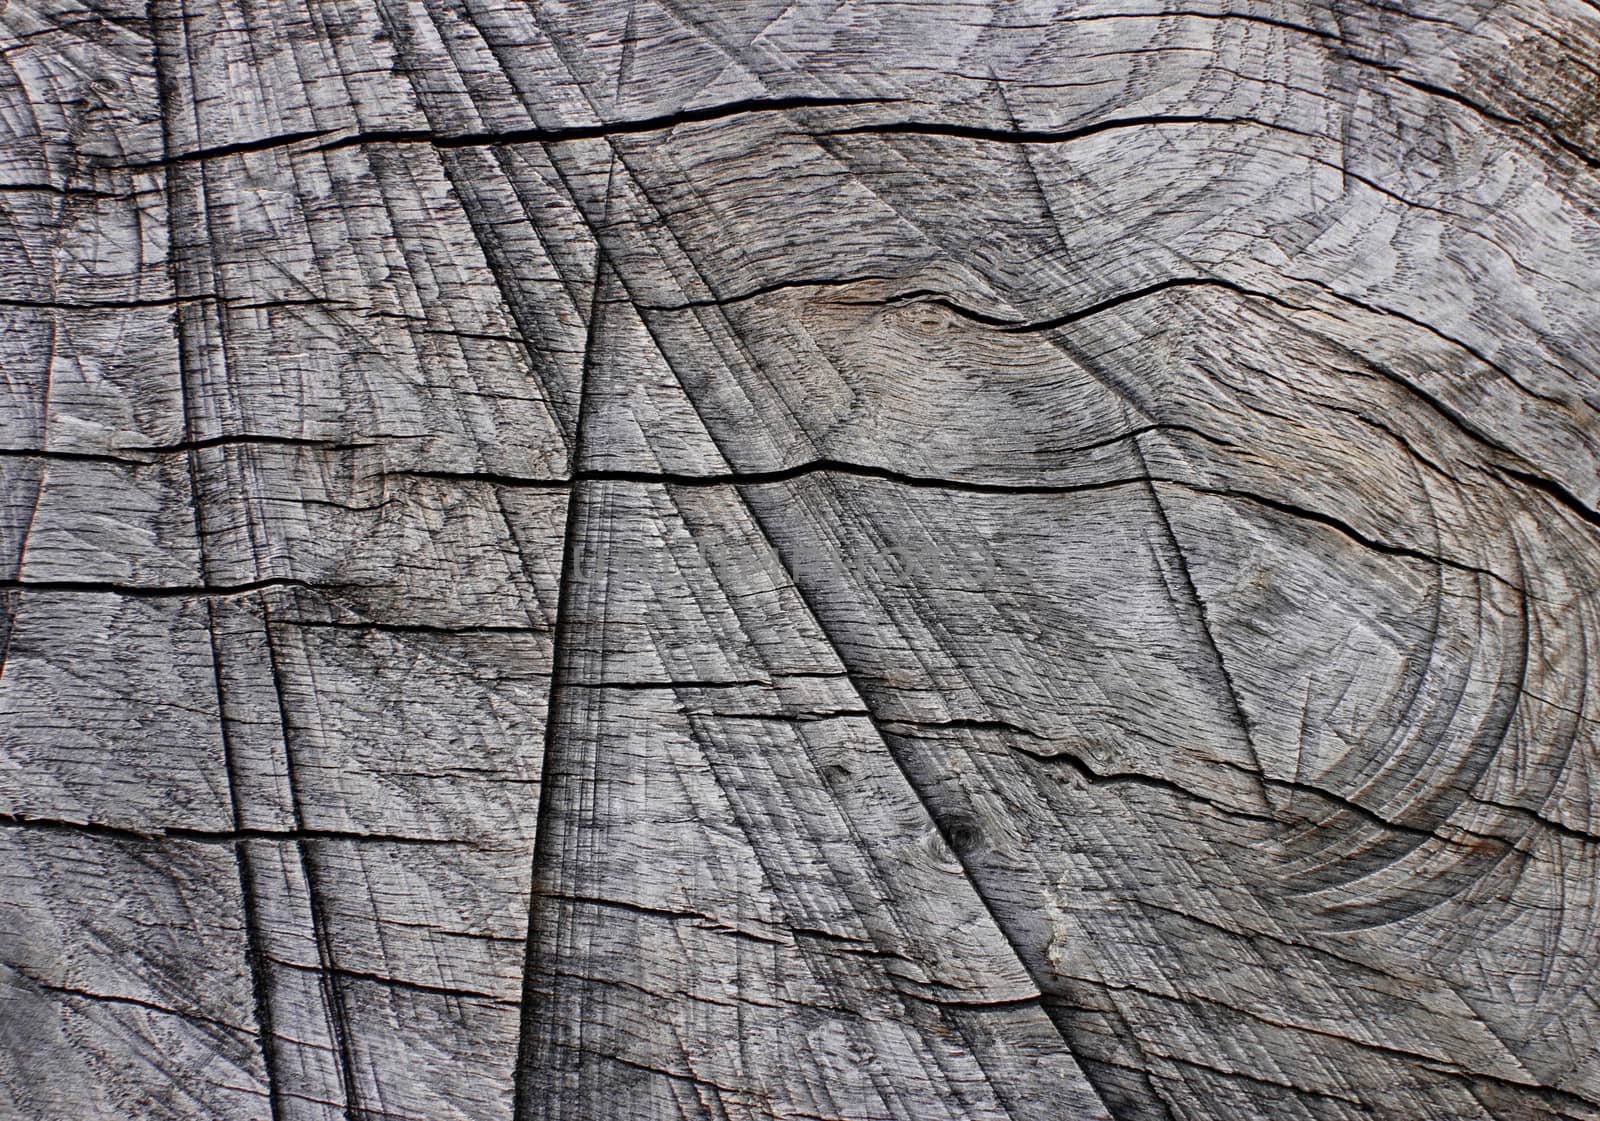 Weathered wood abstract background texture